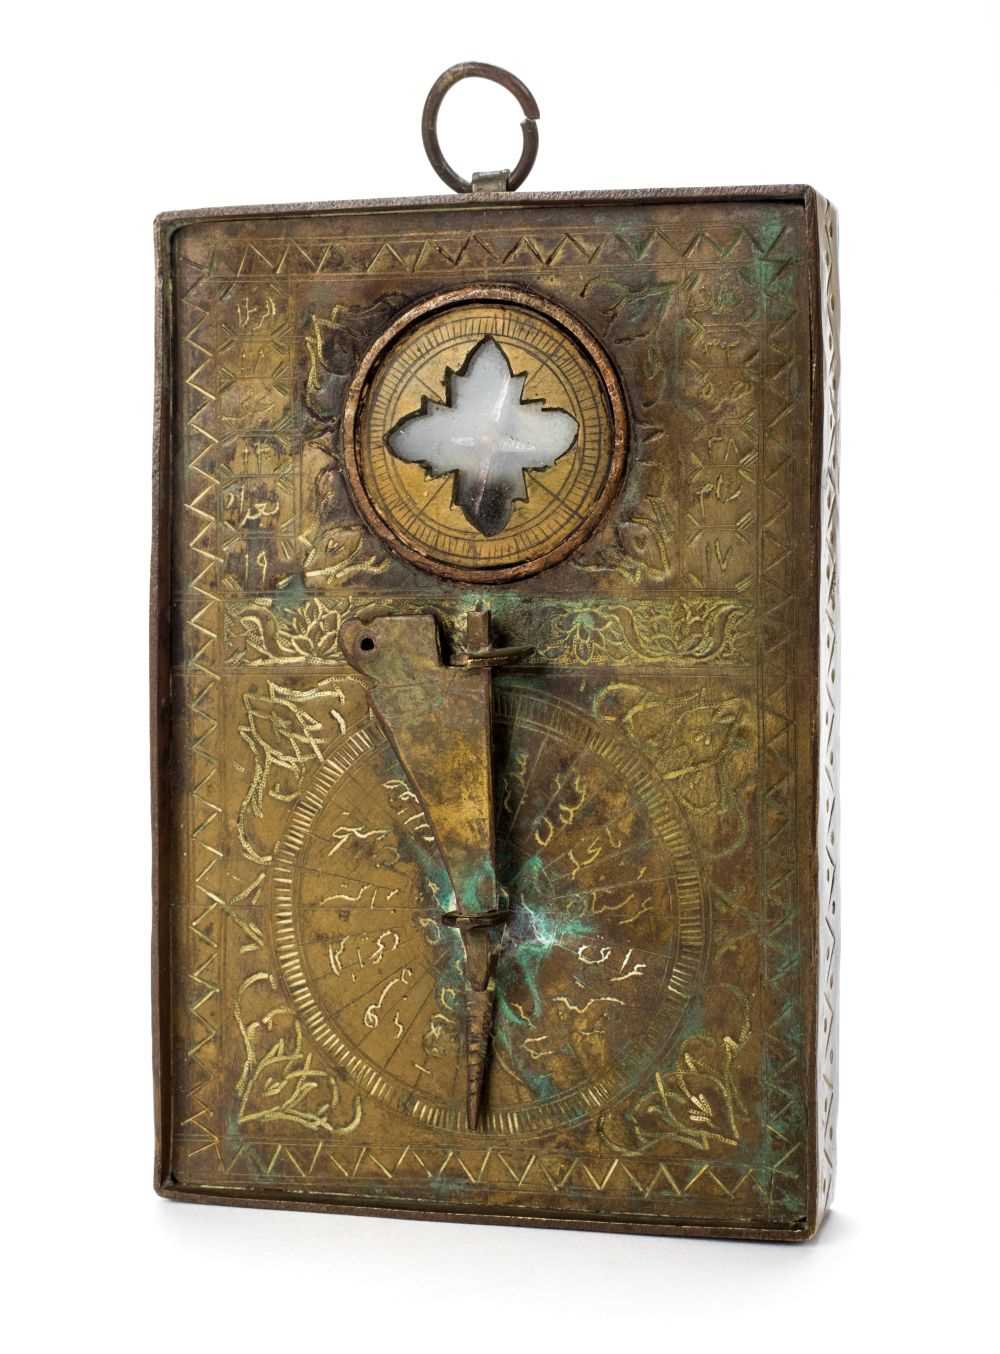 Lot 83 - Indo-Persian Compass. An early 20th century Qibla indicator